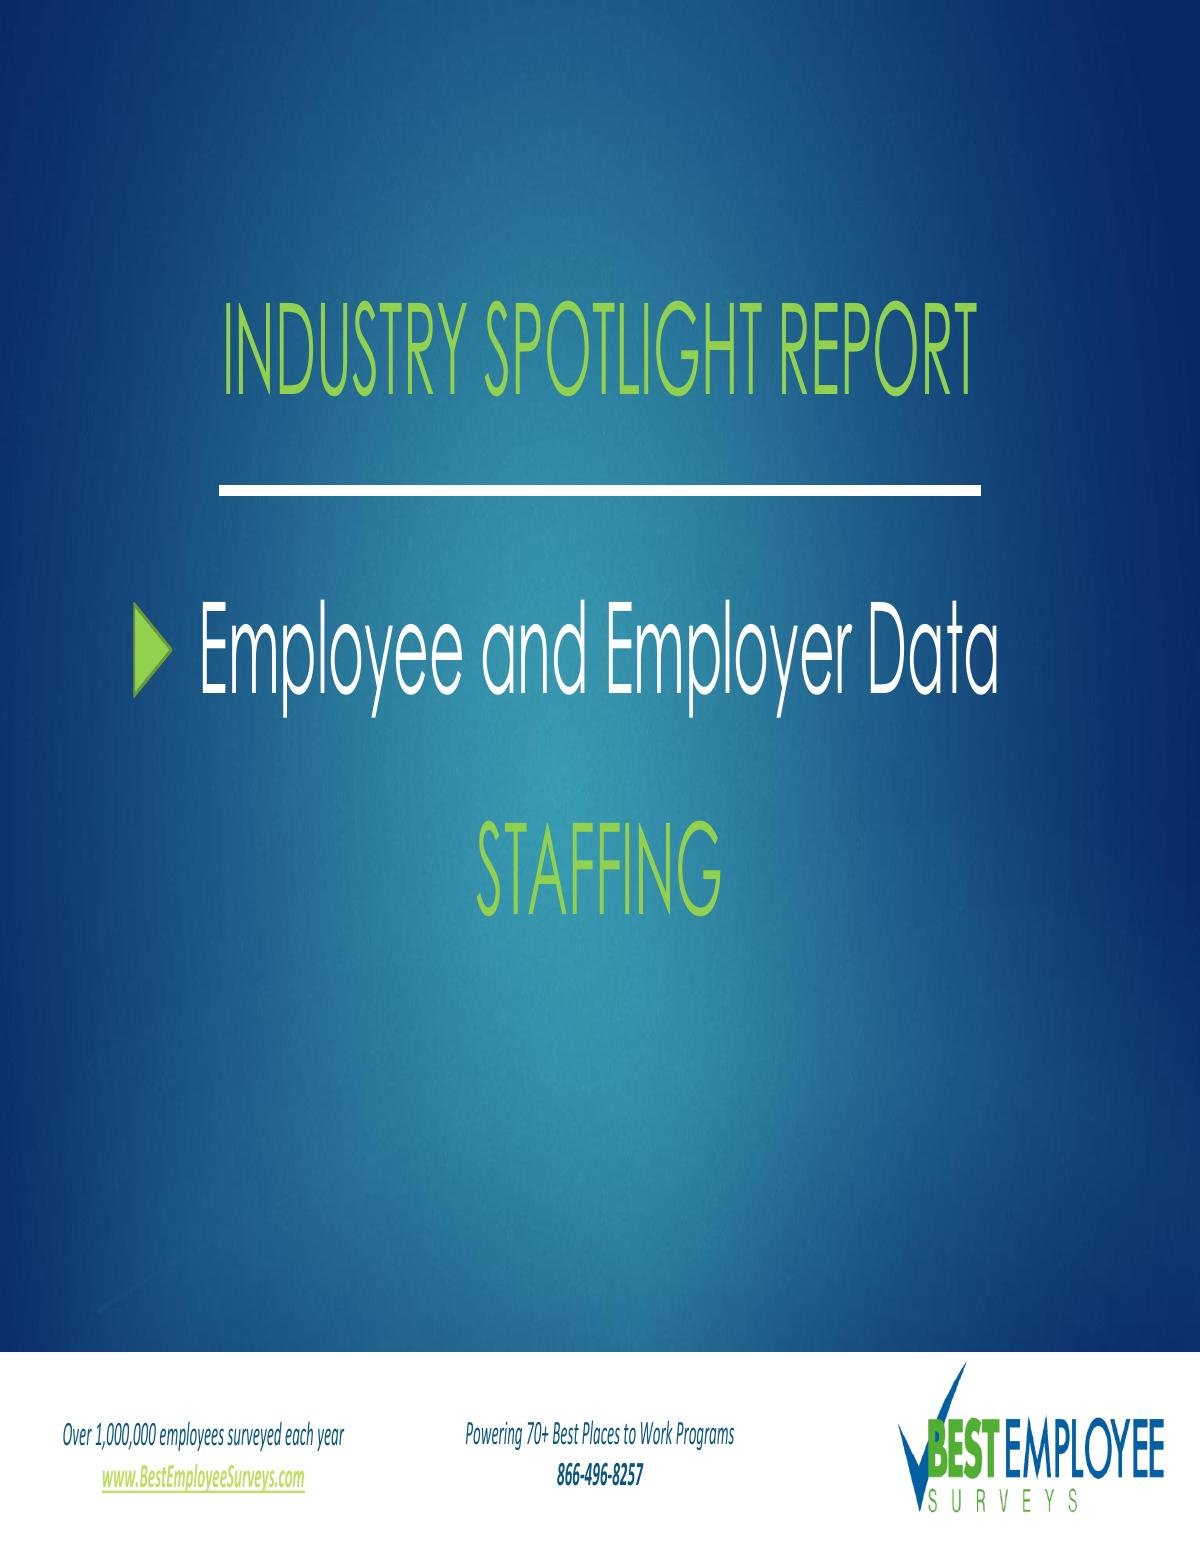 2019 Employee Engagement and Satisfaction Report: Staffing